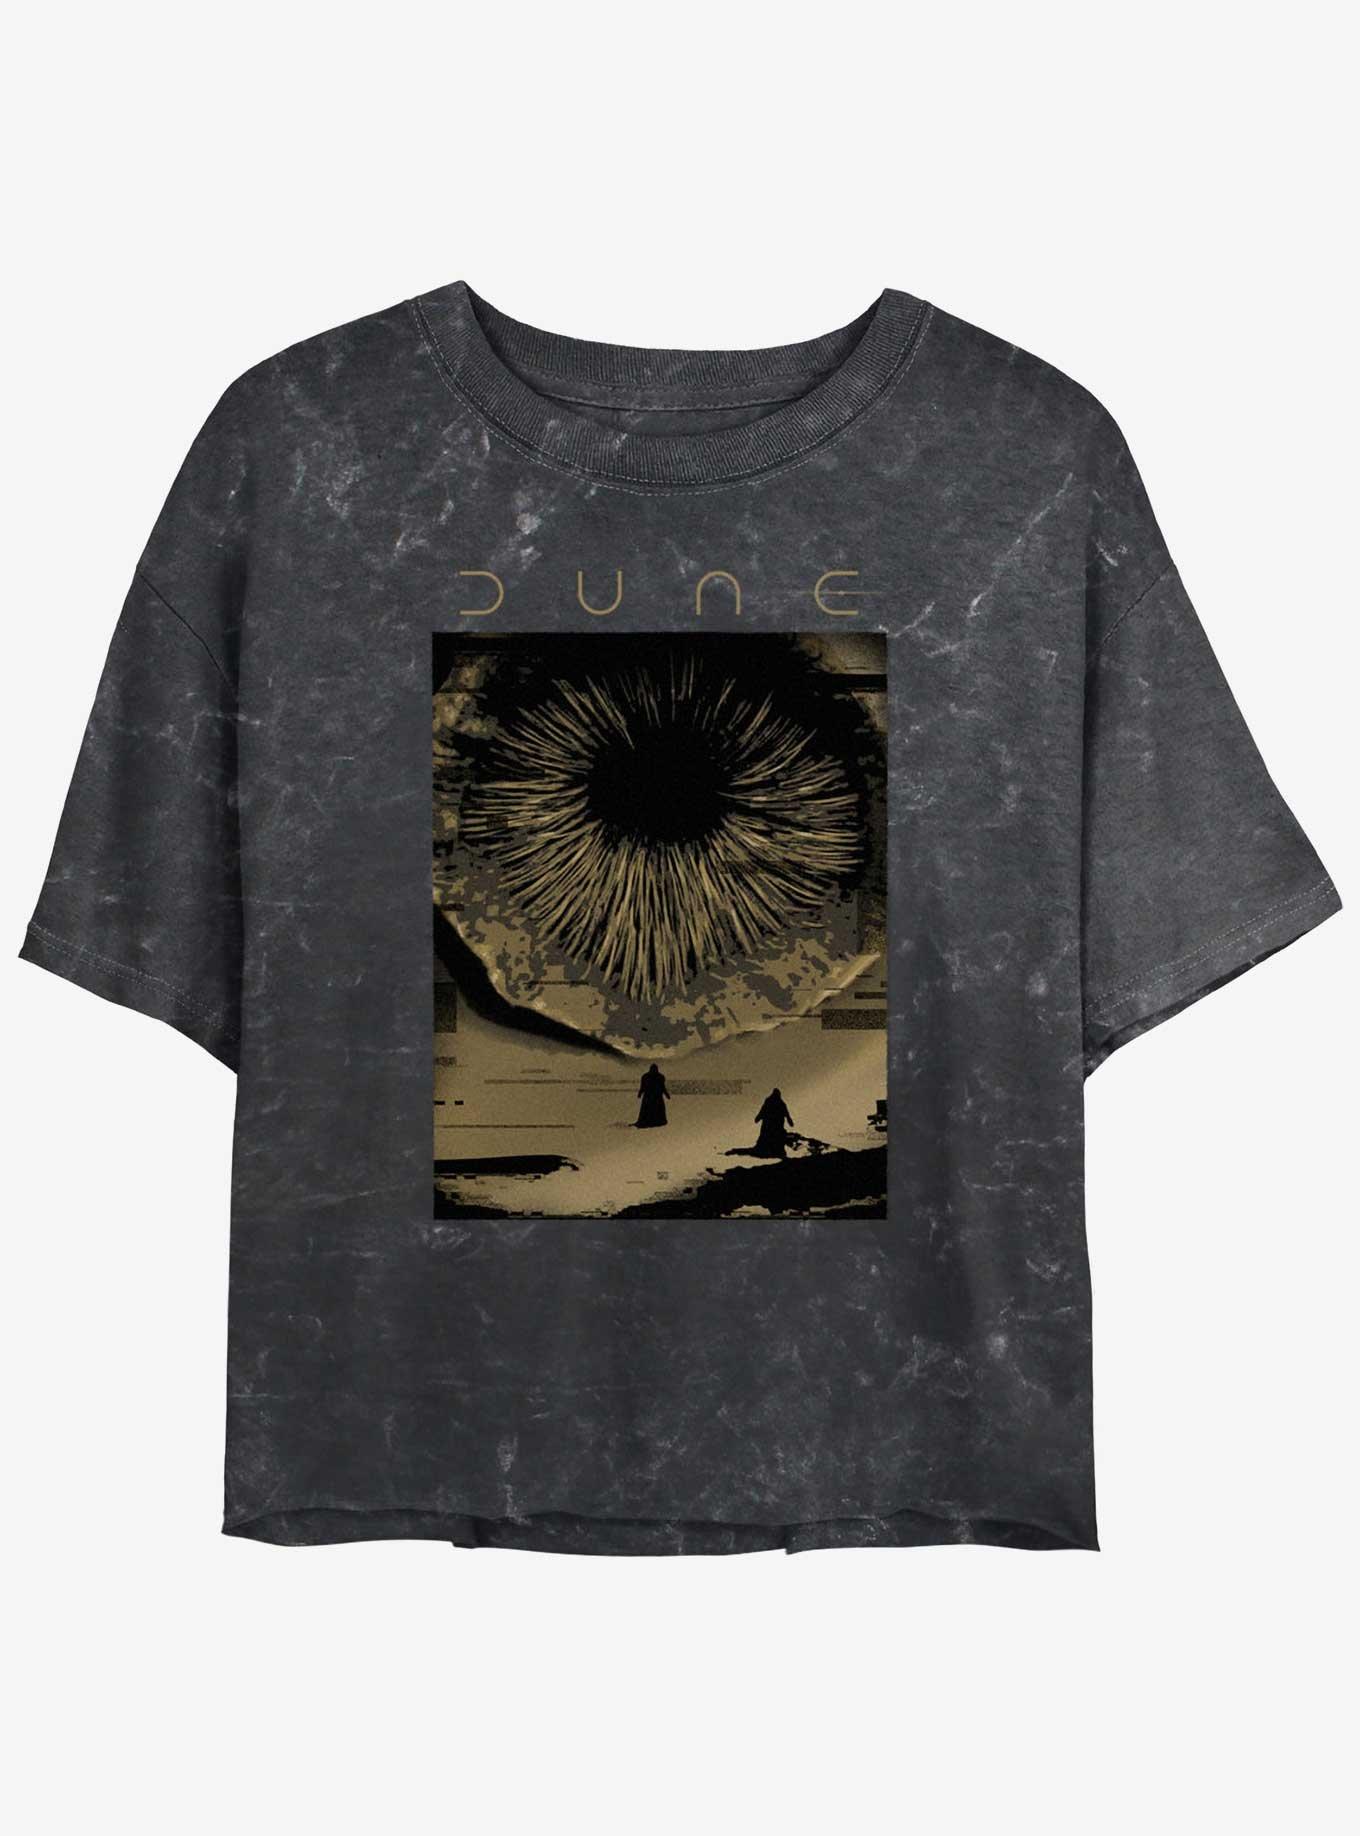 Dune: Part Two Shai-Hulud Poster Mineral Wash Girls Crop T-Shirt